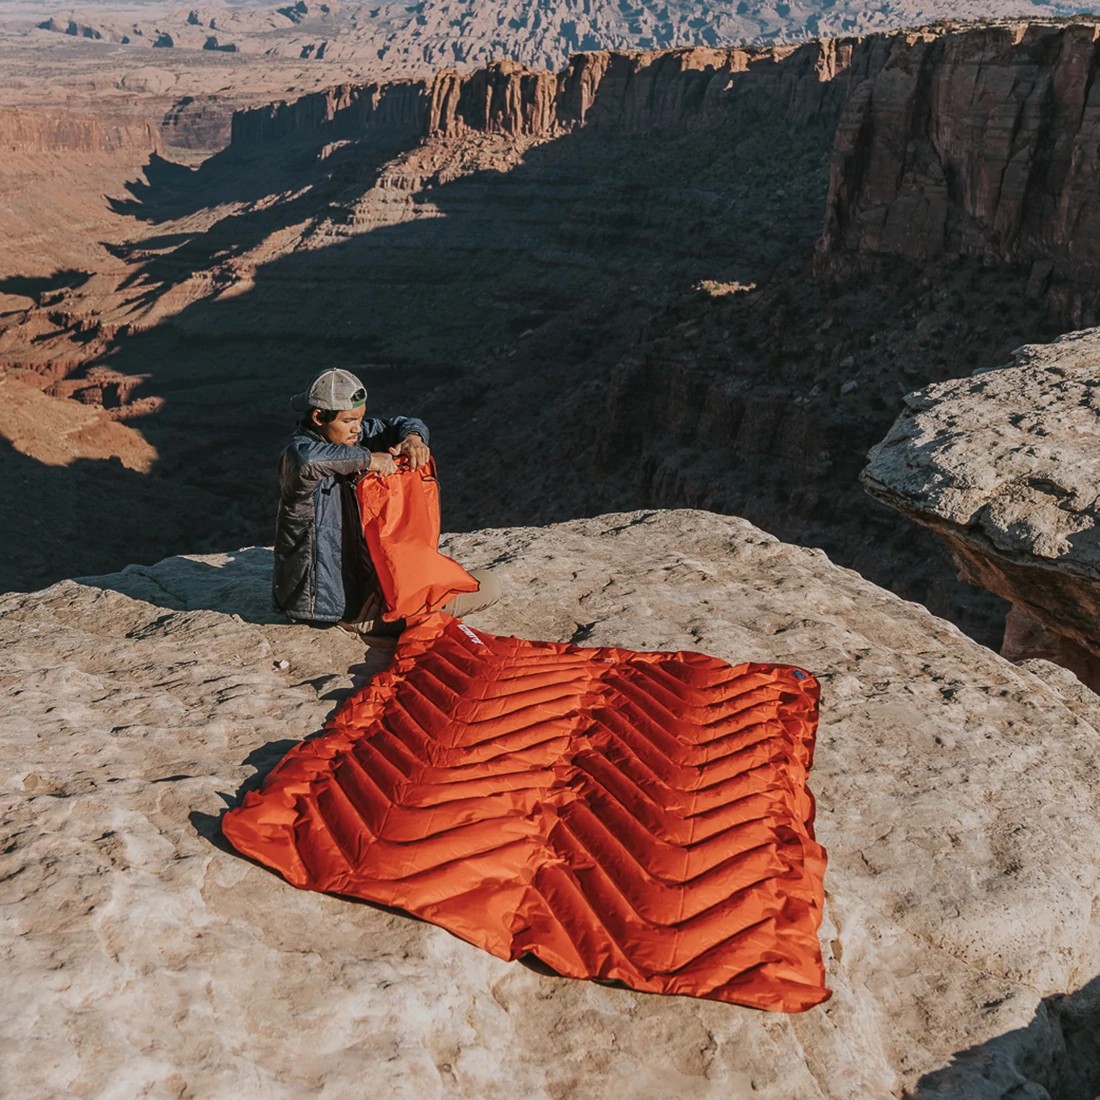 Klymit Insulated Double V Double Camping Mattress